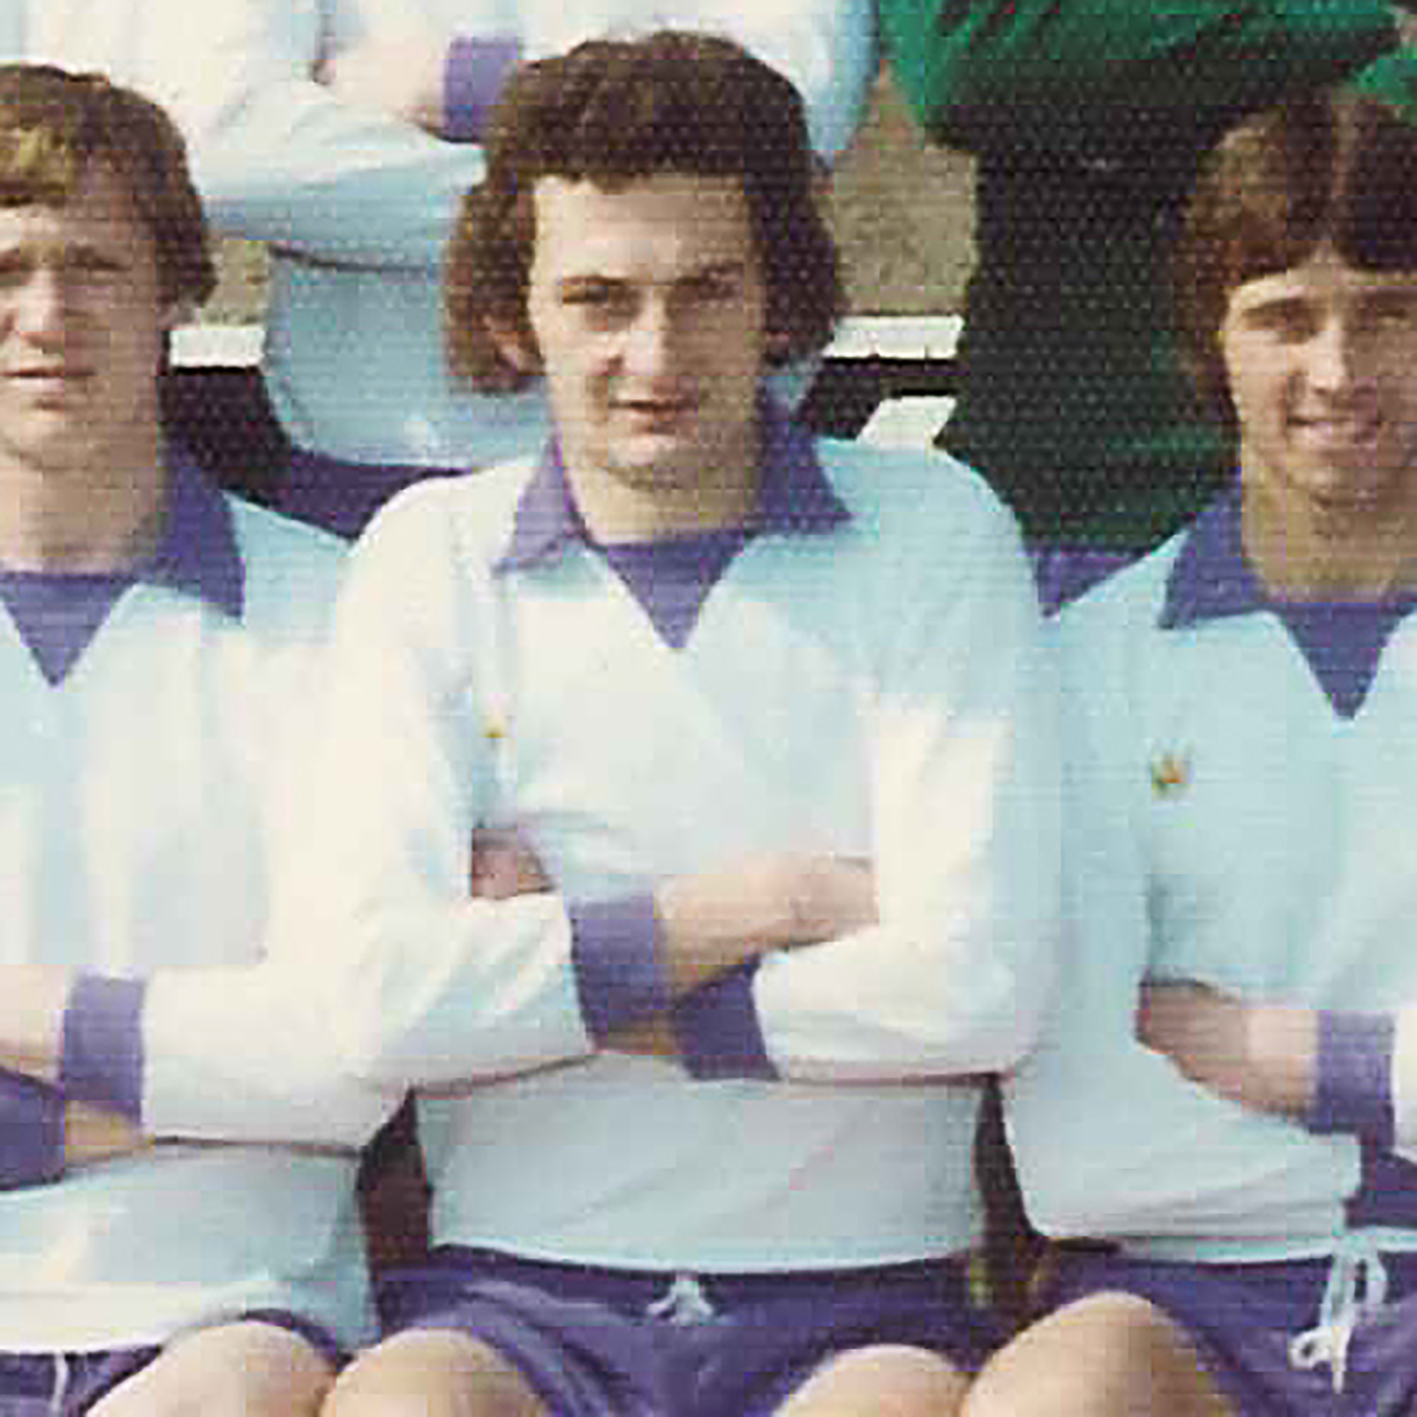 Steve Peplow in his Tranmere playing days. Photo: TRFC